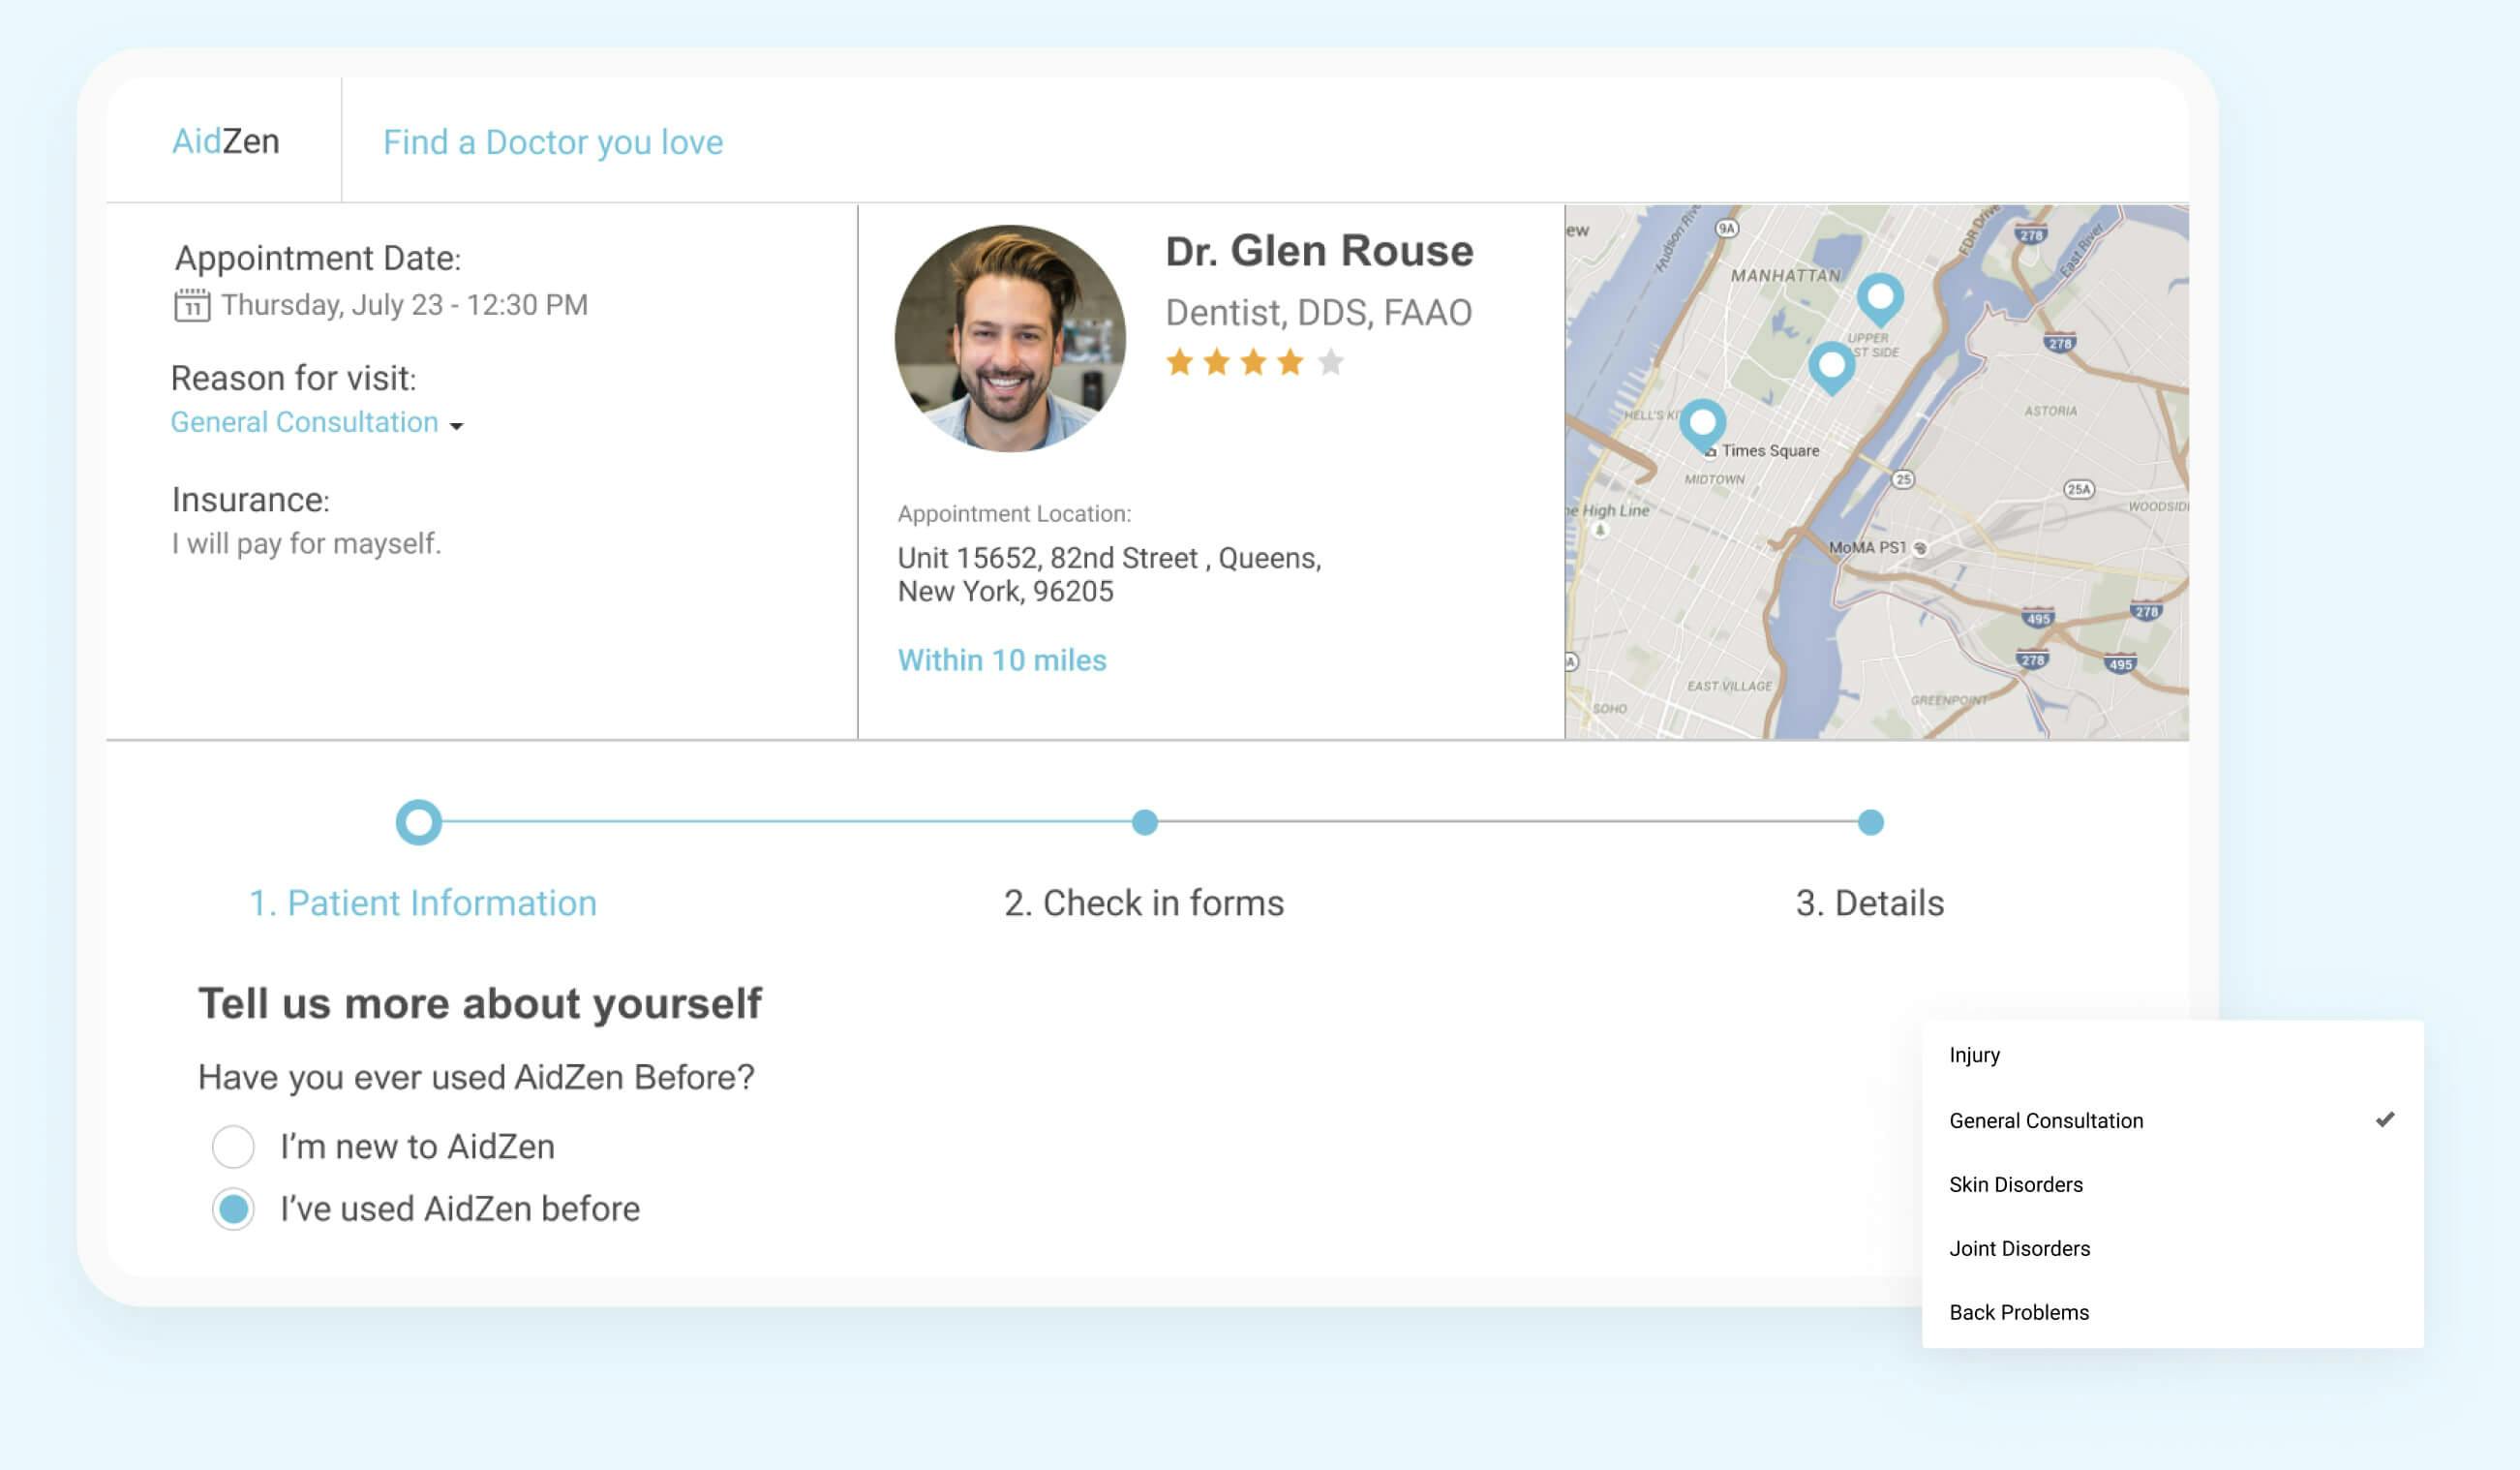 Appointment check-in flow user experience